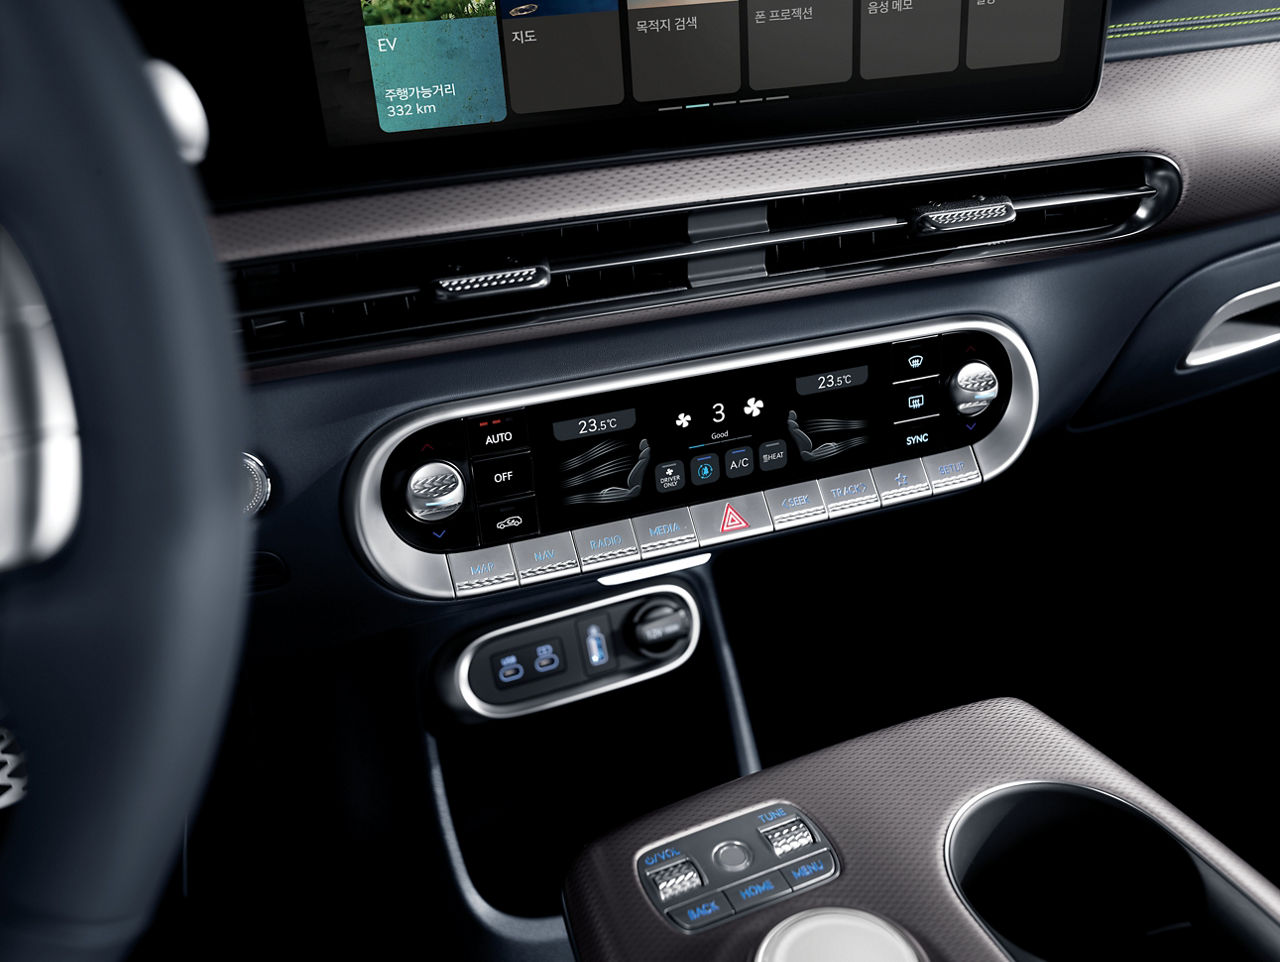 Control console of a car air conditioning system